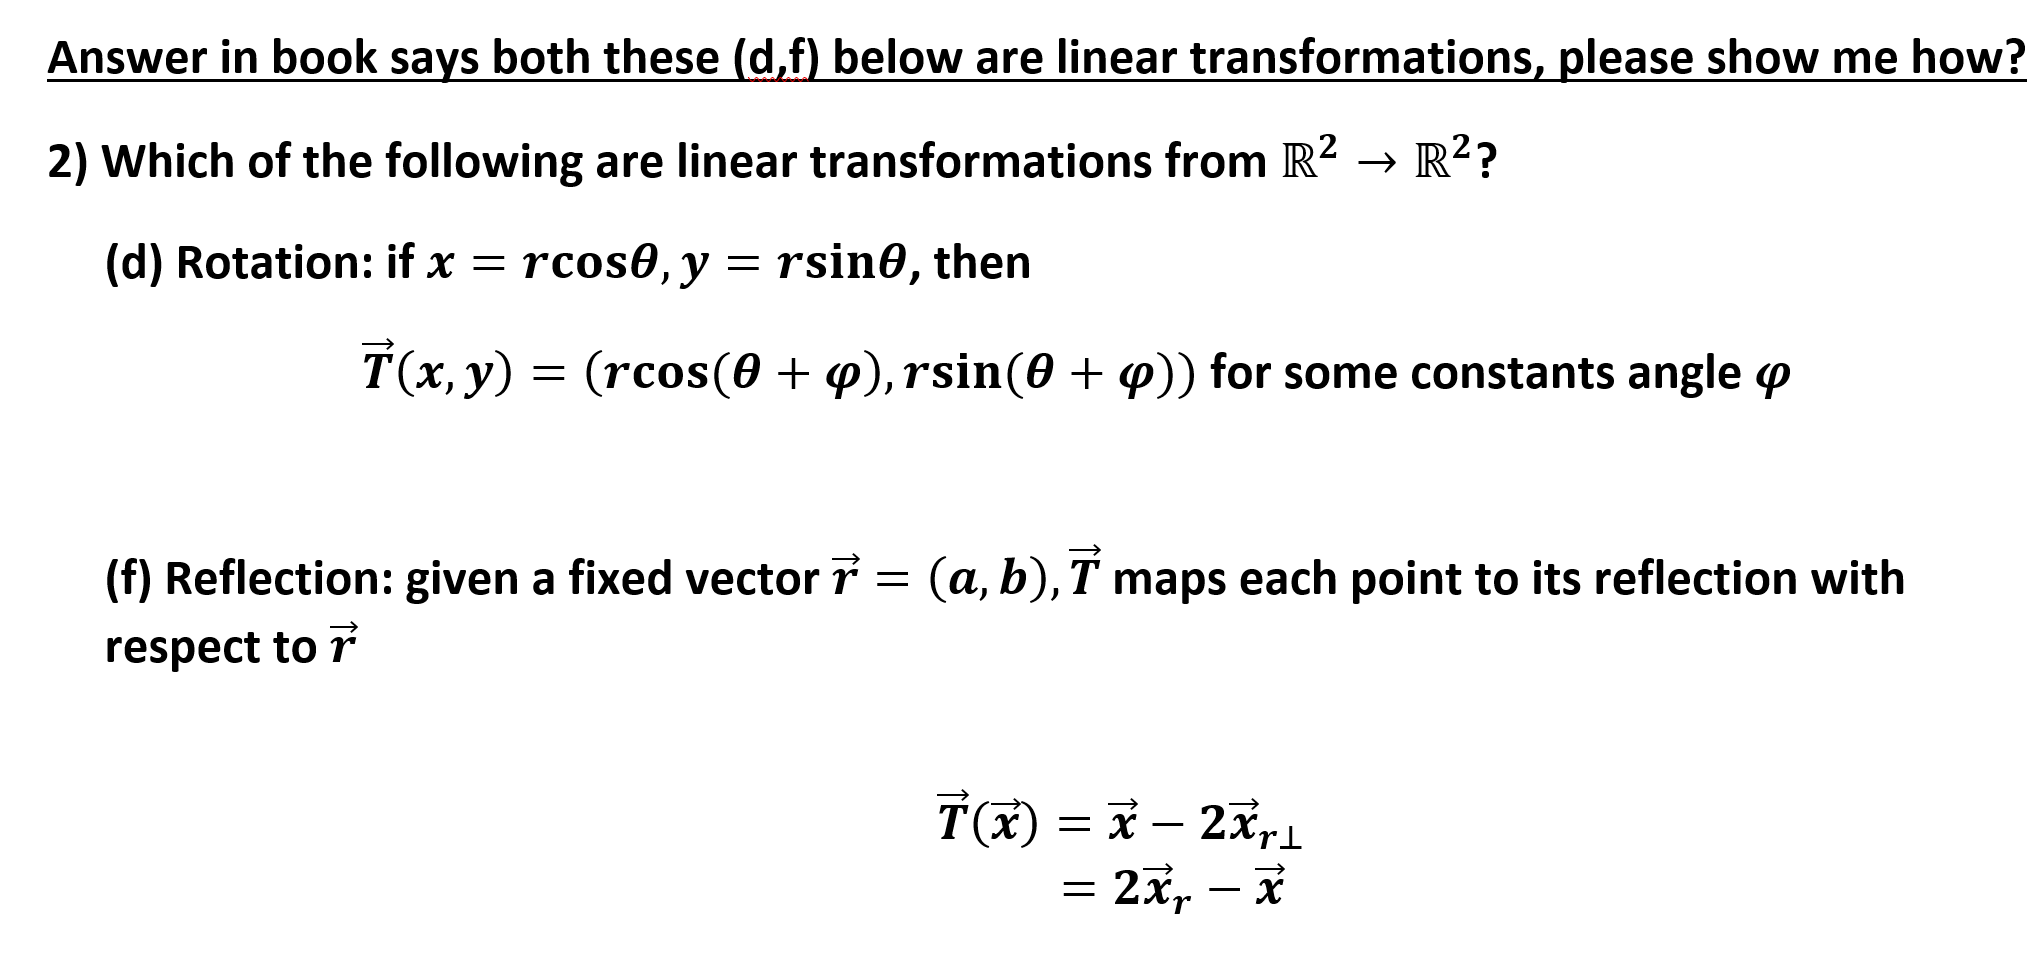 Answer in book says both these (d,f) below are linear transformations, please show me how?
2) Which of the following are linear transformations from R2 >R2?
(d) Rotation: if x = rcos0,y
rsin0, then
T(x, y)
(rcos(0), rsin(0 + p)) for some constants angle p
(f) Reflection: given a fixed vector 7 = (a, b), T maps each point to its reflection with
respect to r
2x,
